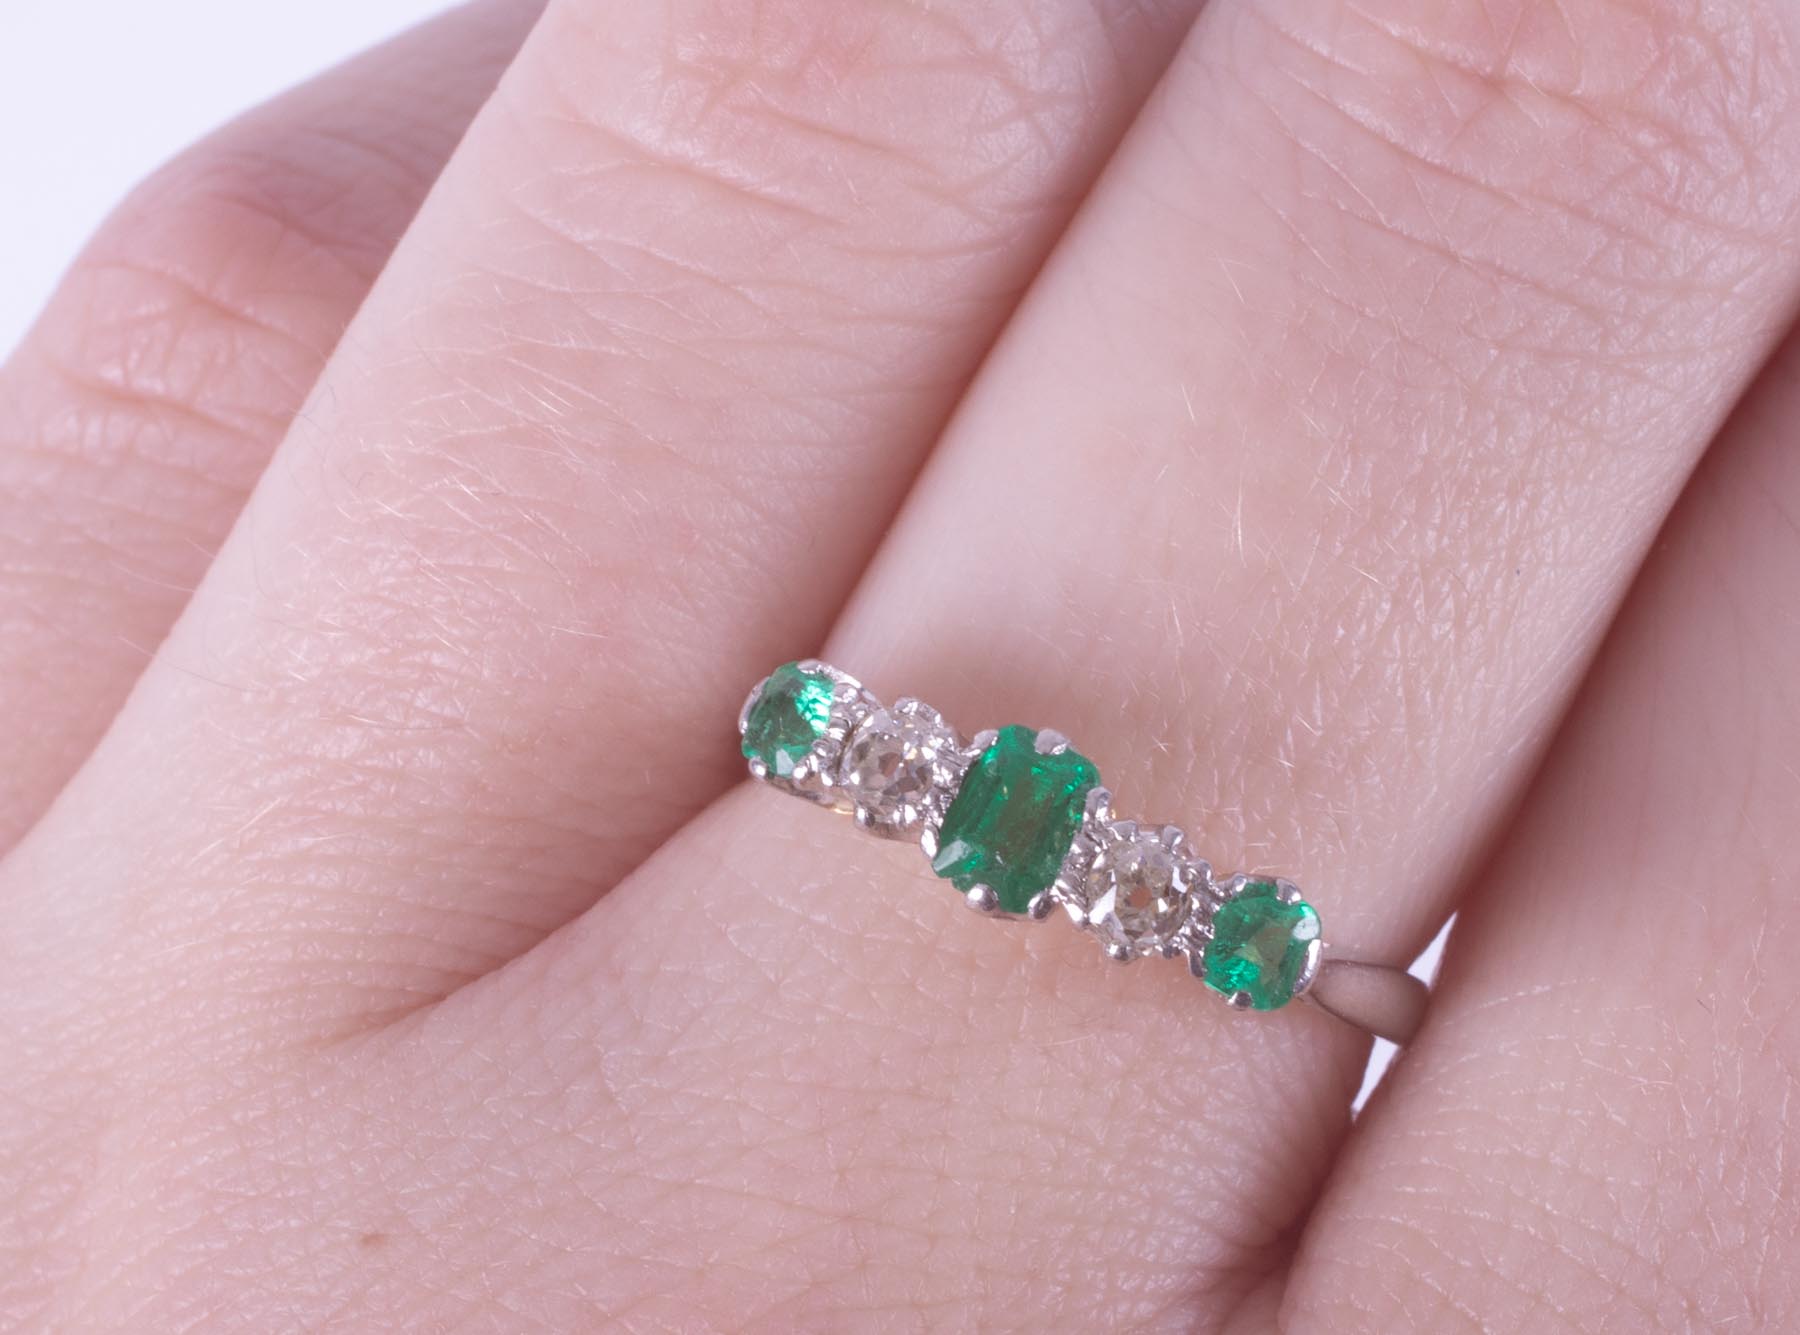 A platinum & 18ct yellow gold five stone ring set with a central emerald cut emerald, - Image 4 of 4